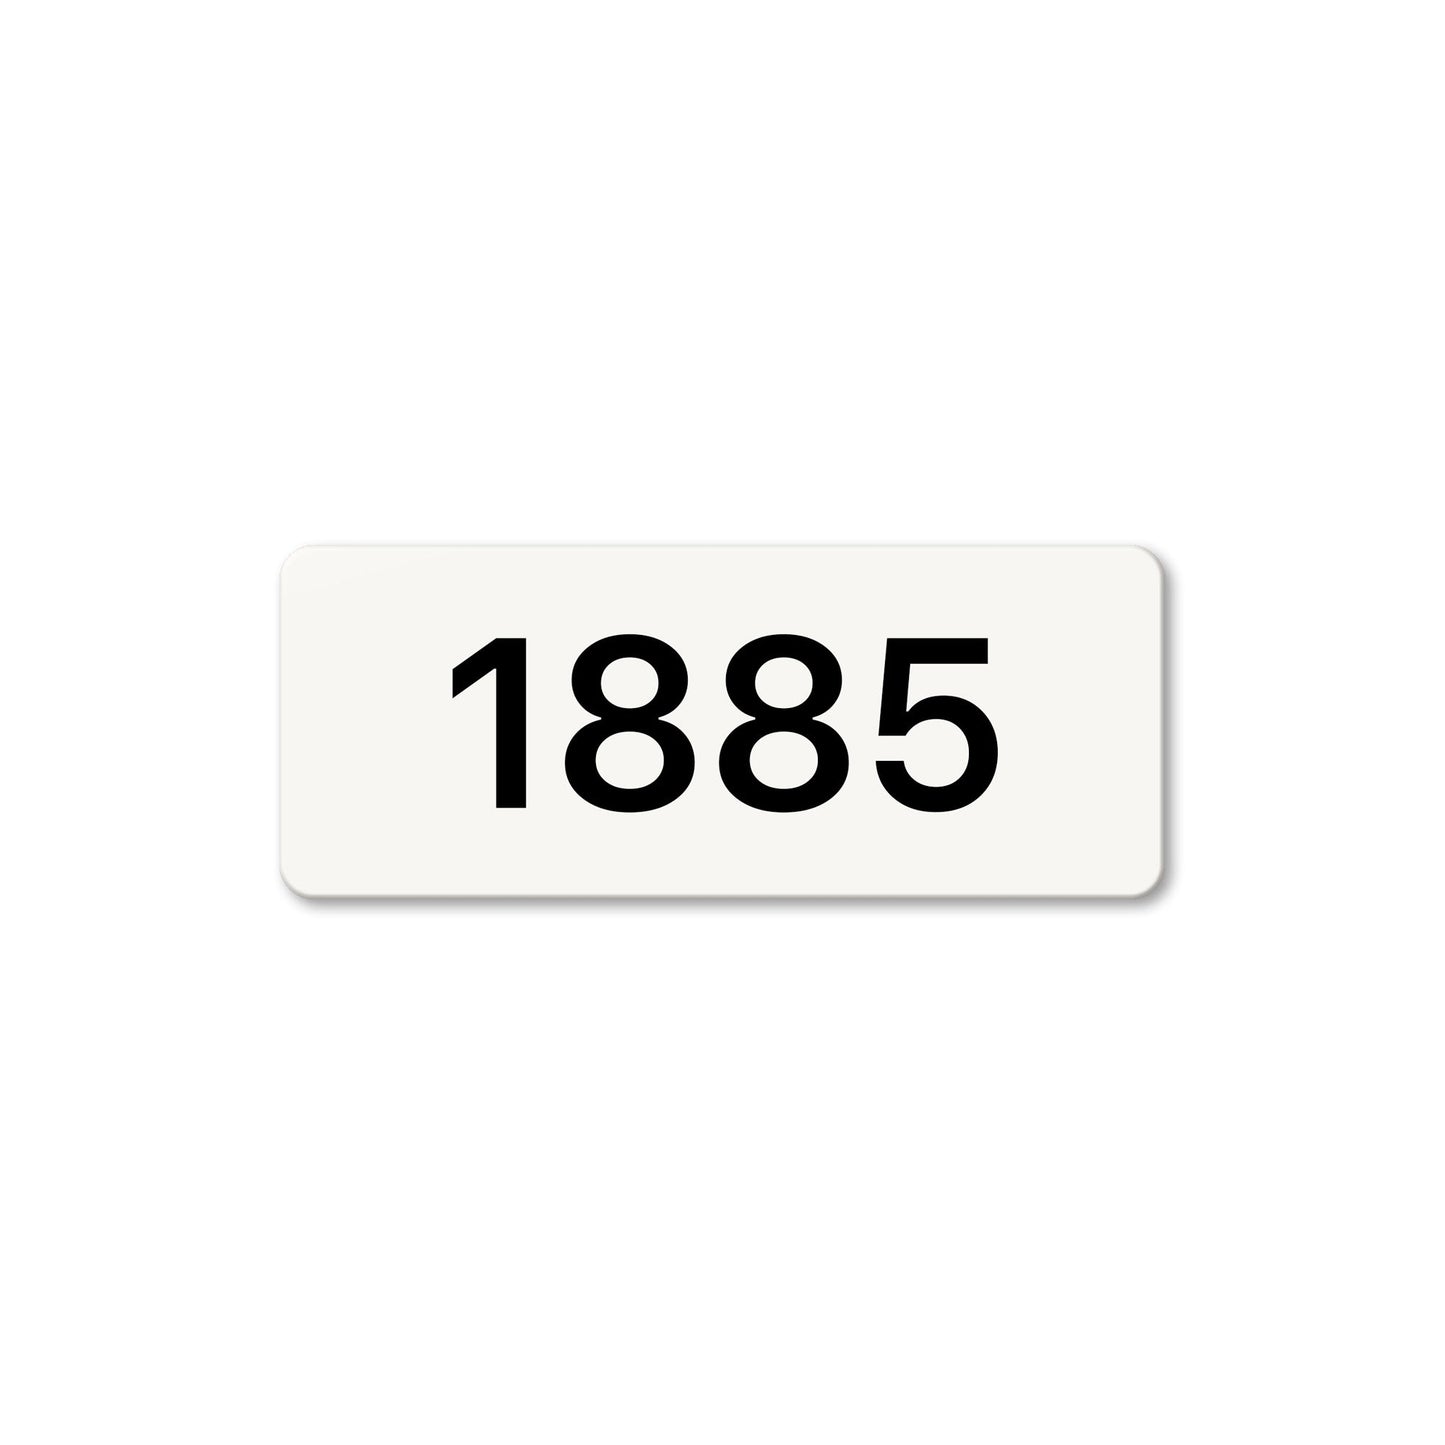 Numeral 1885